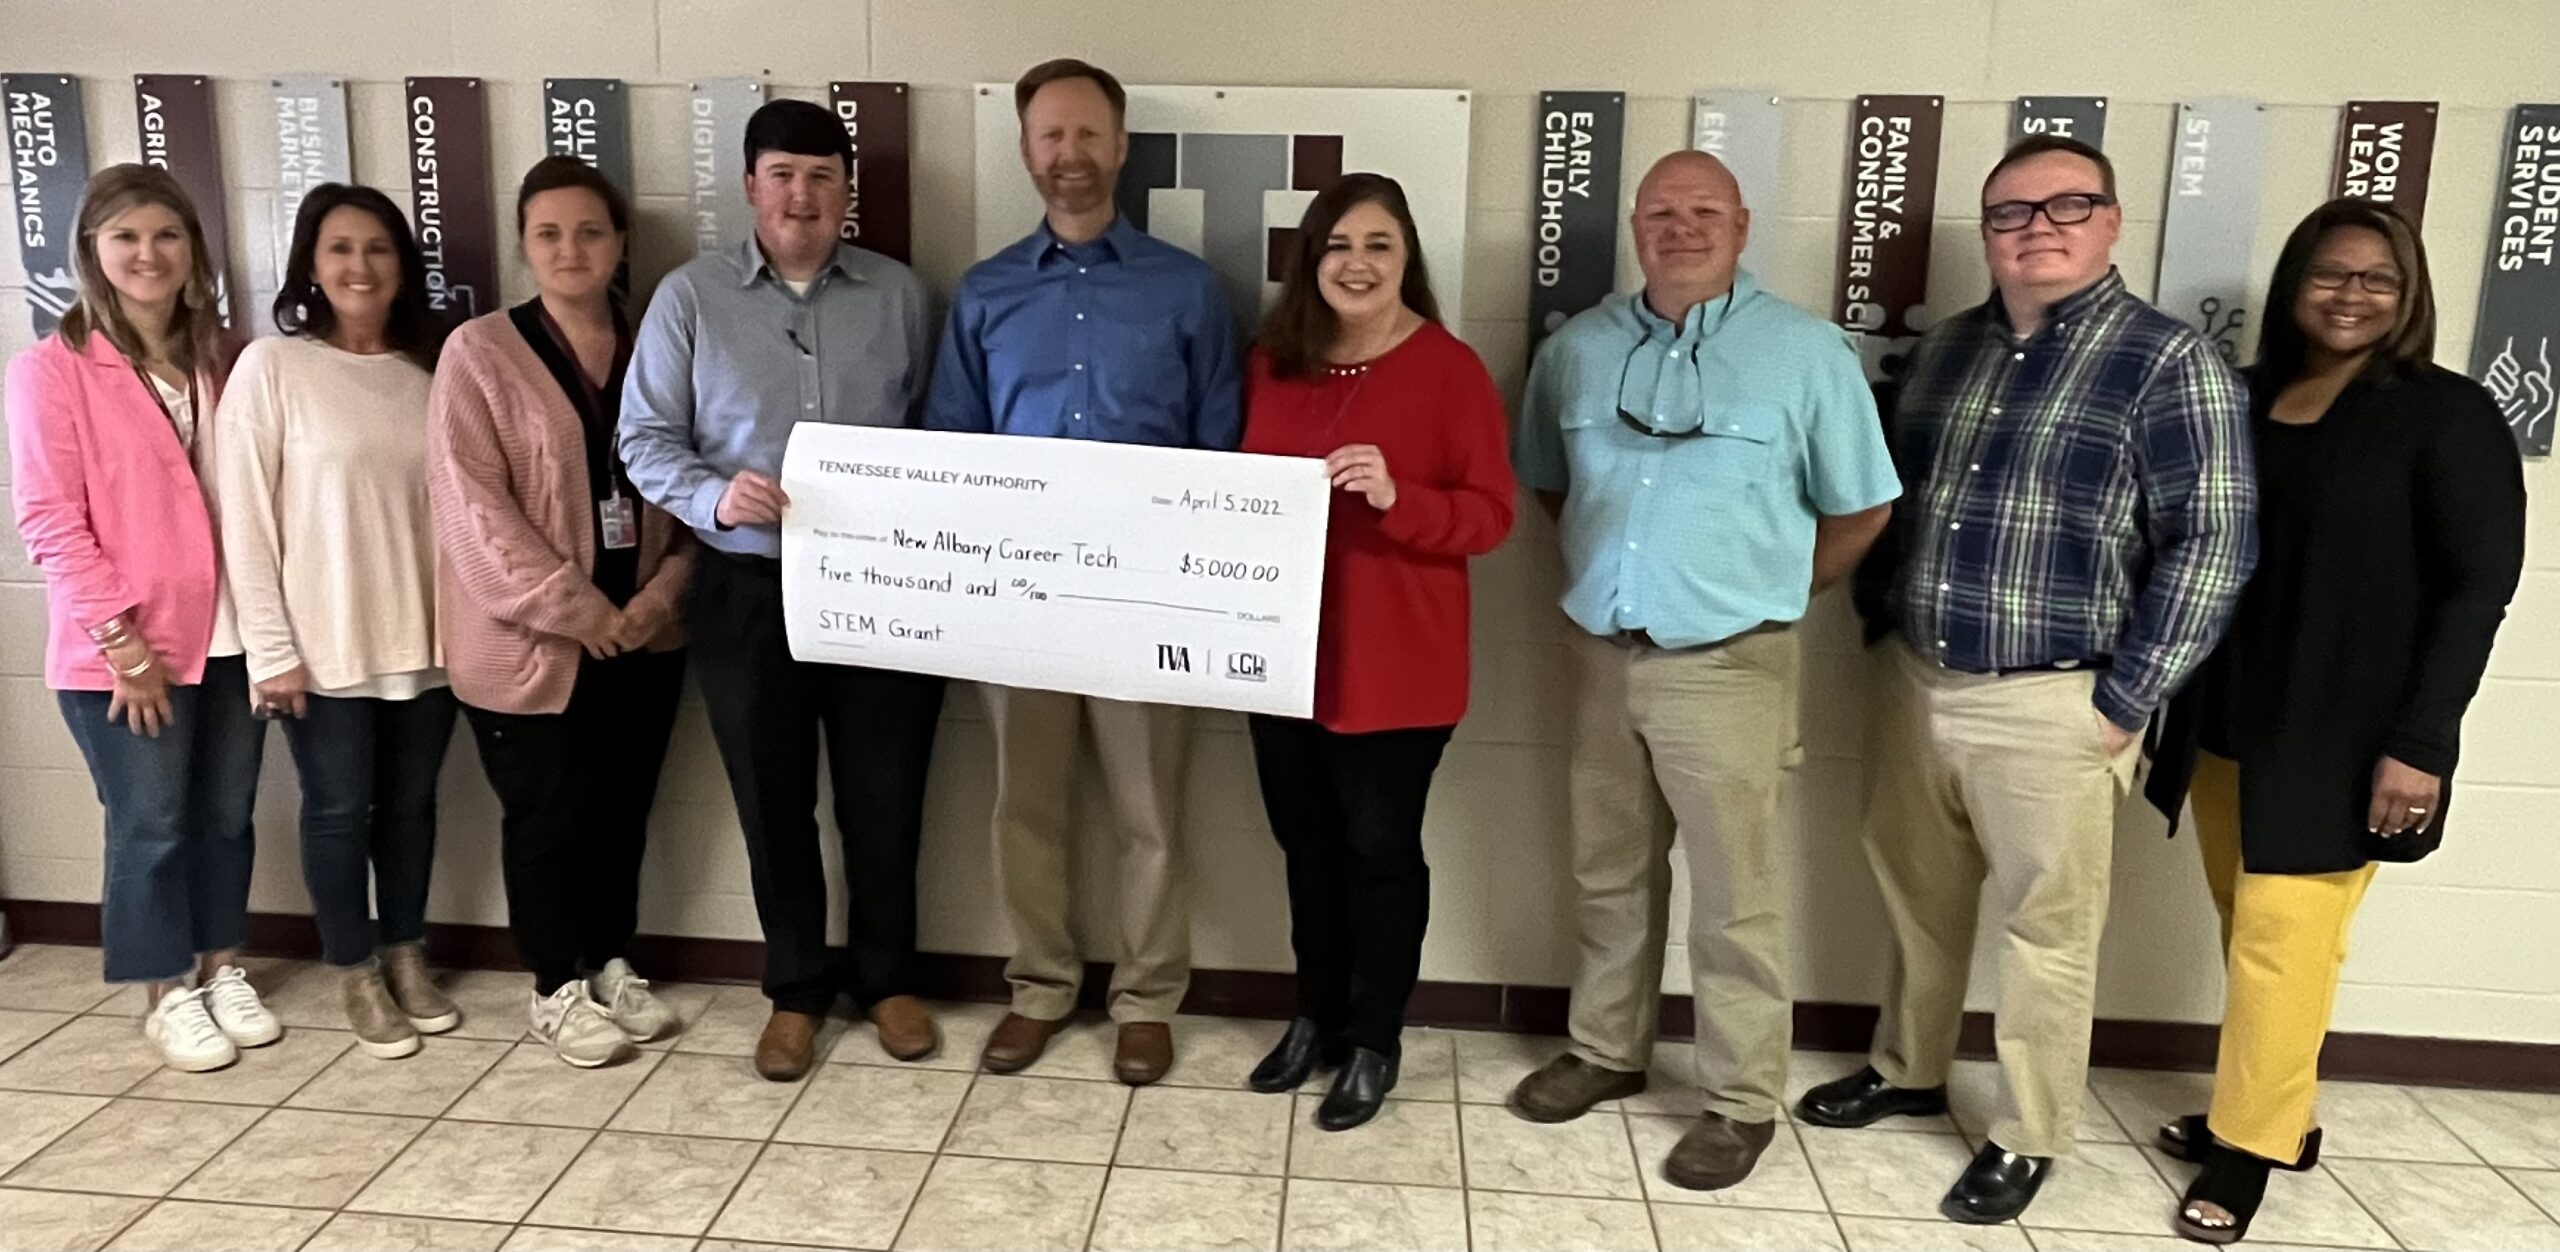 New Albany School of Career & Technical Education Receives TVA Grant Pictured l-r: Brittany Brock; Alison Moore; April Voyles; William Denton, New Albany Light, Gas, & Water; Derek McGill, Tennessee Valley Authority; April Hobson, CTE Director; Jalon Bullock, Chris Russell, and Latrina Walker.